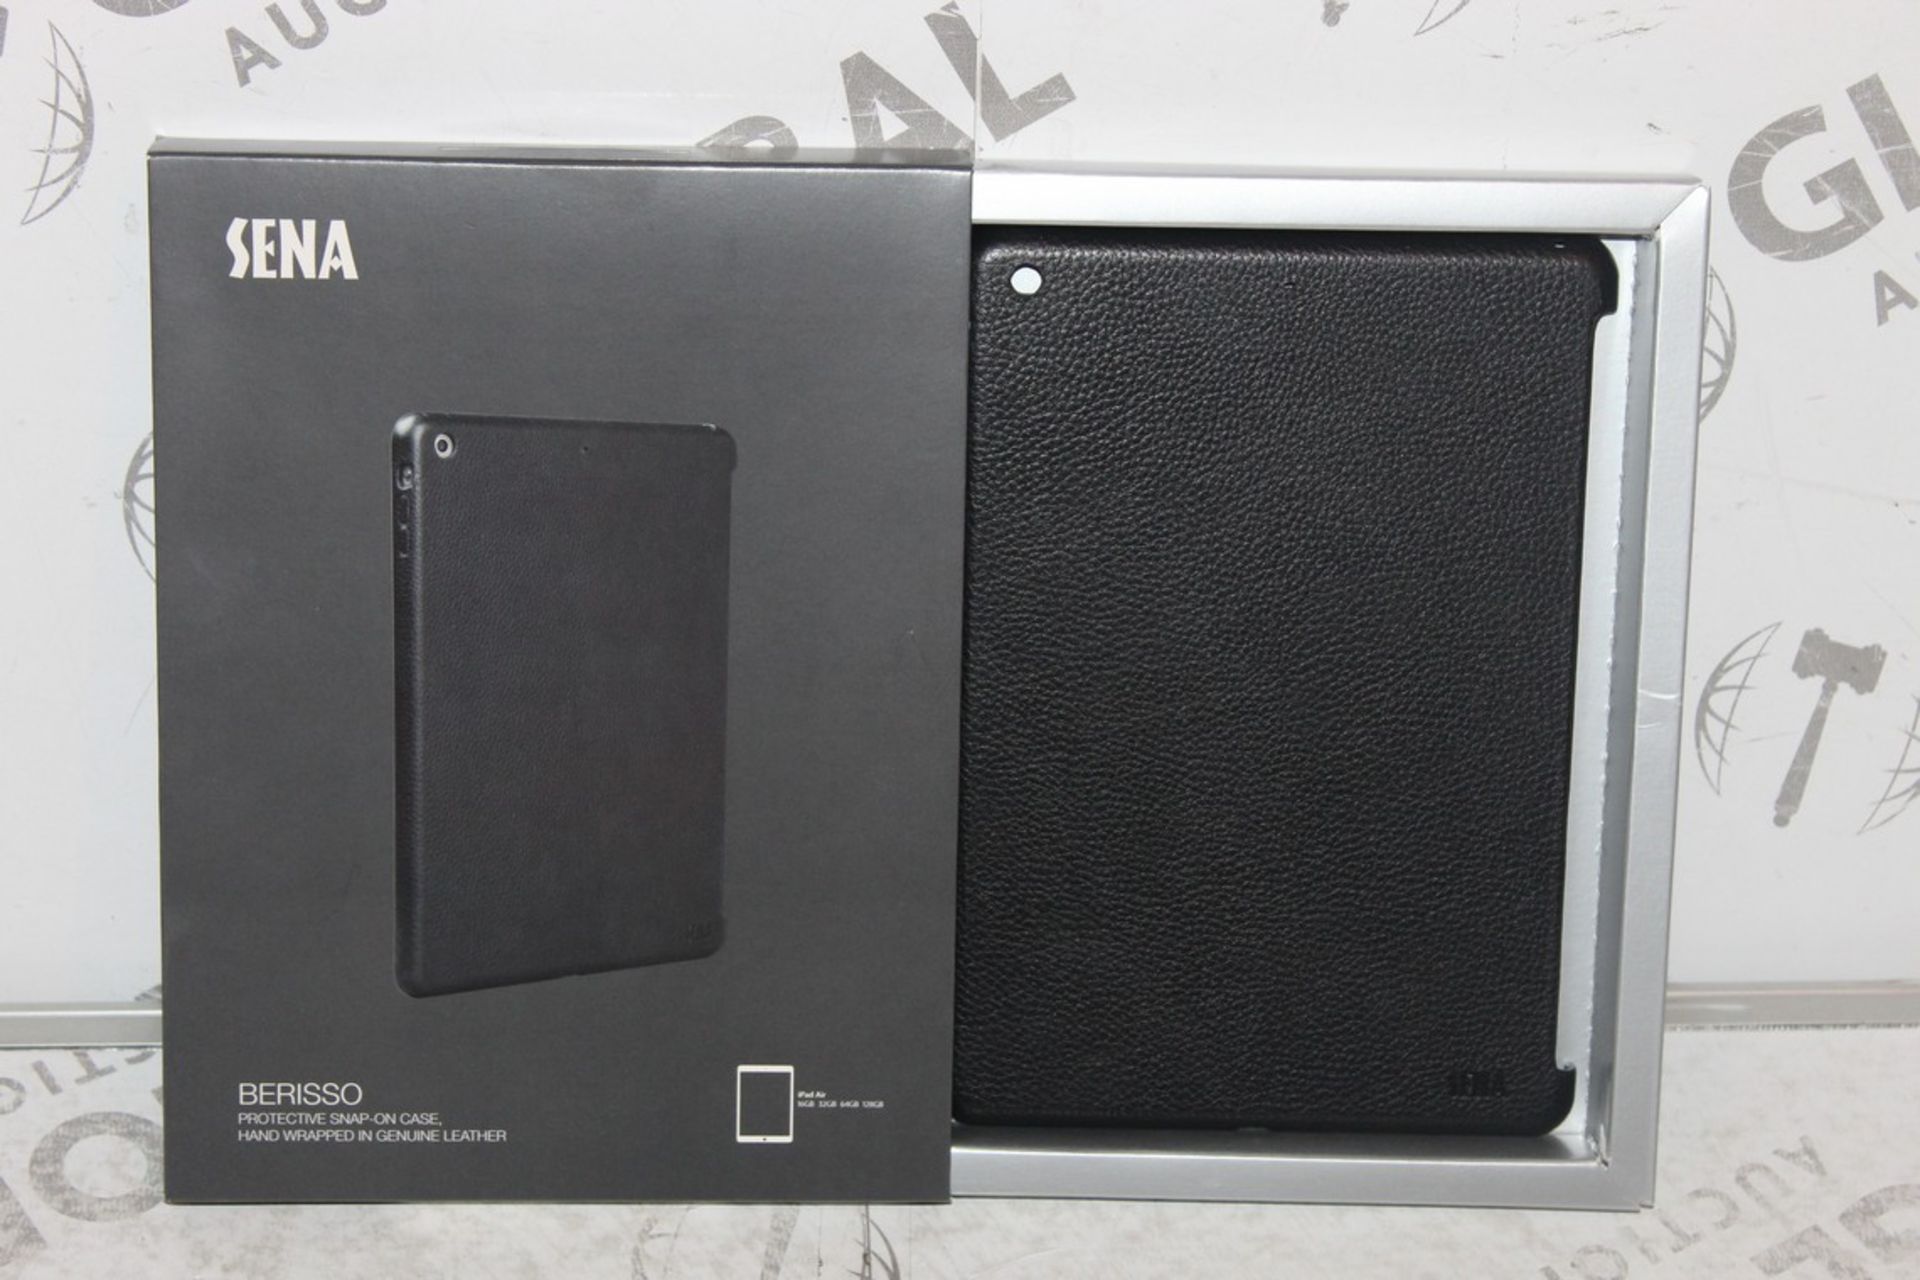 Lot to Contain 2 Brand New Sena Berisso Protective Ipad Air Snap On Leather Cases Combined RRP £90